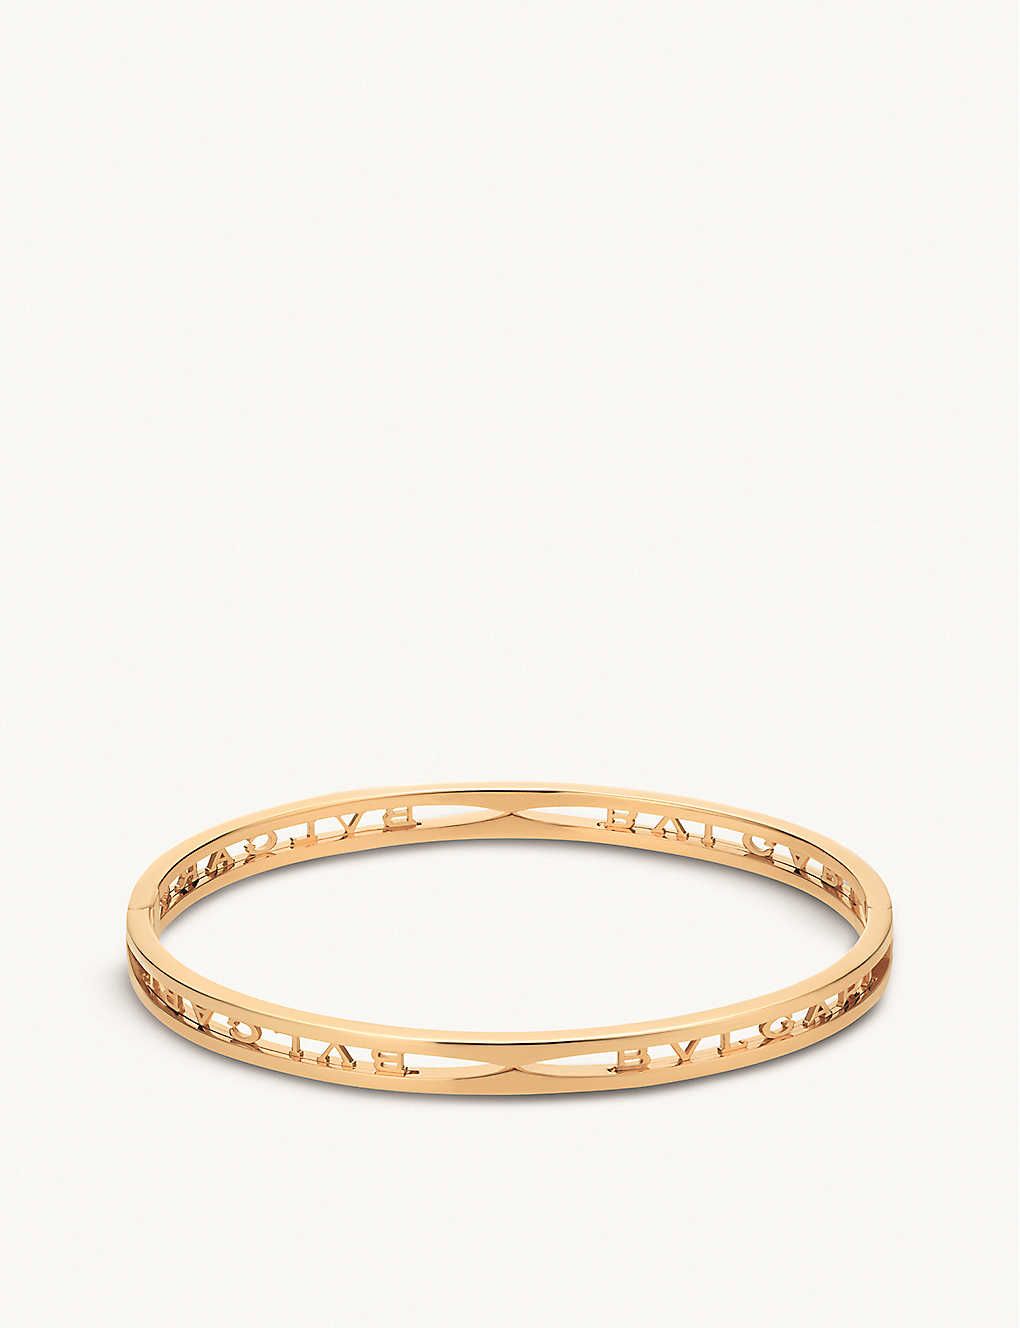 Top 6 Iconic Bracelets for Women to Invest In  Inside The Closet